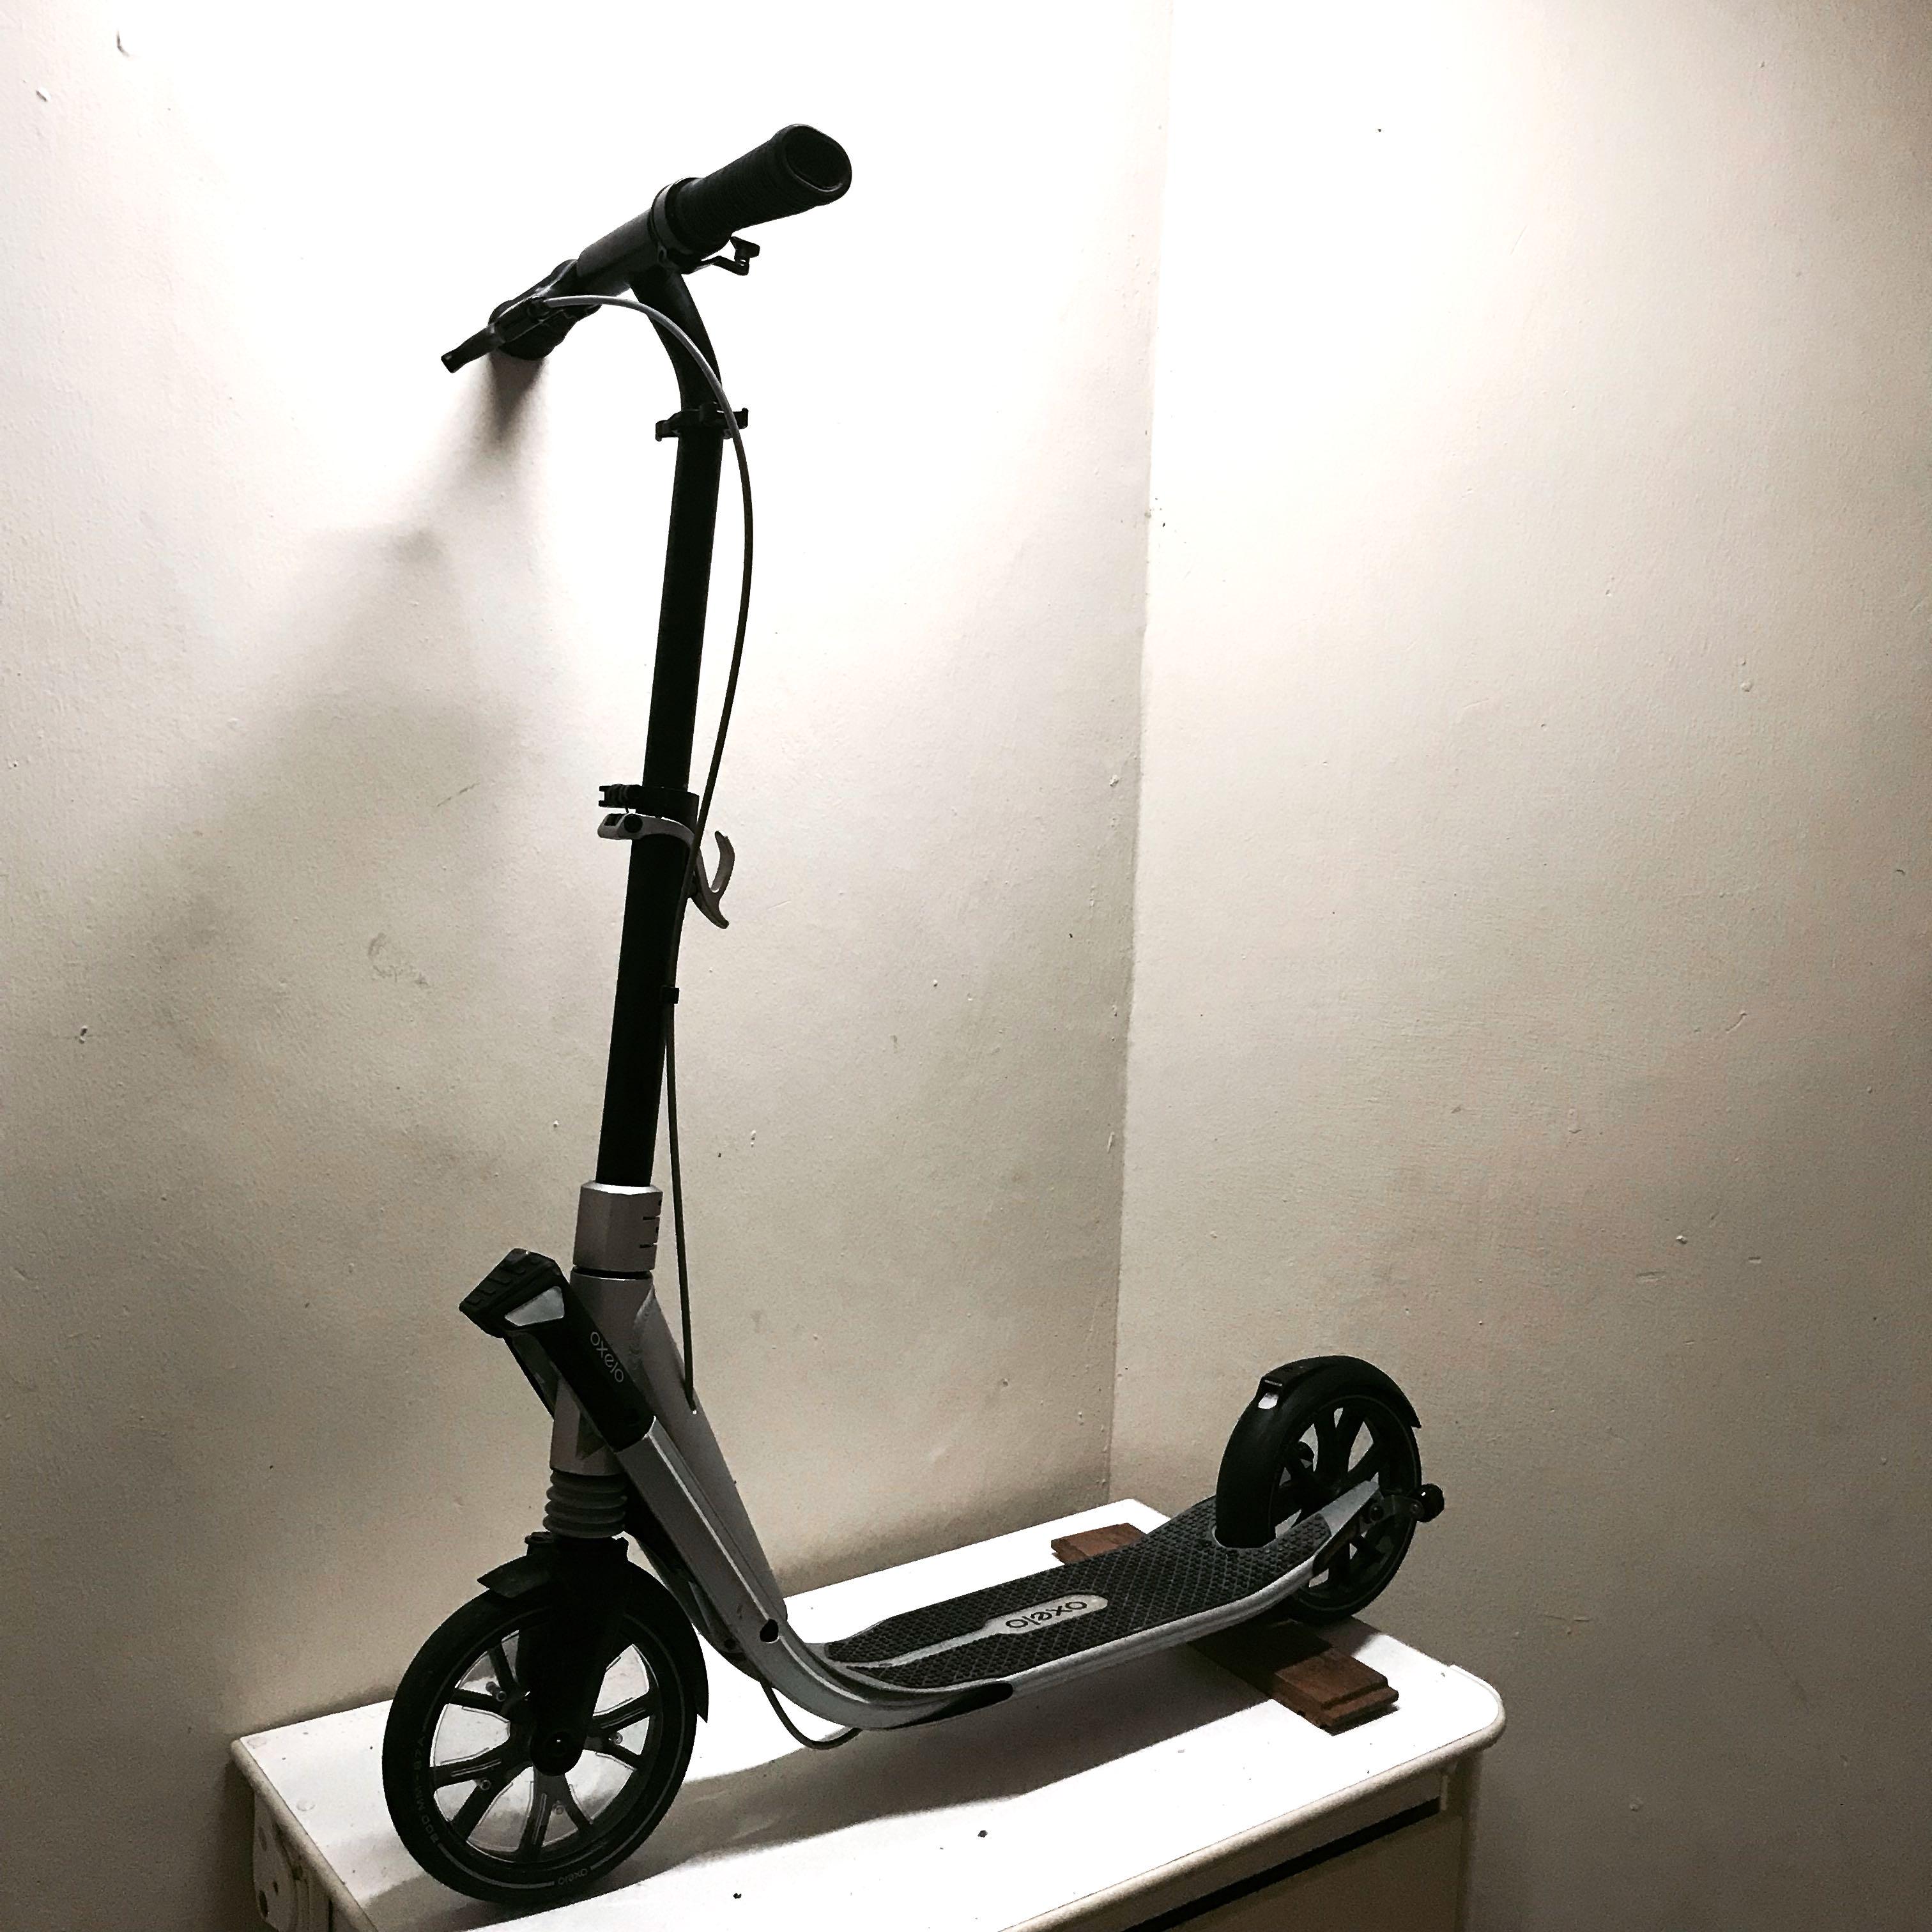 oxelo 9 scooter